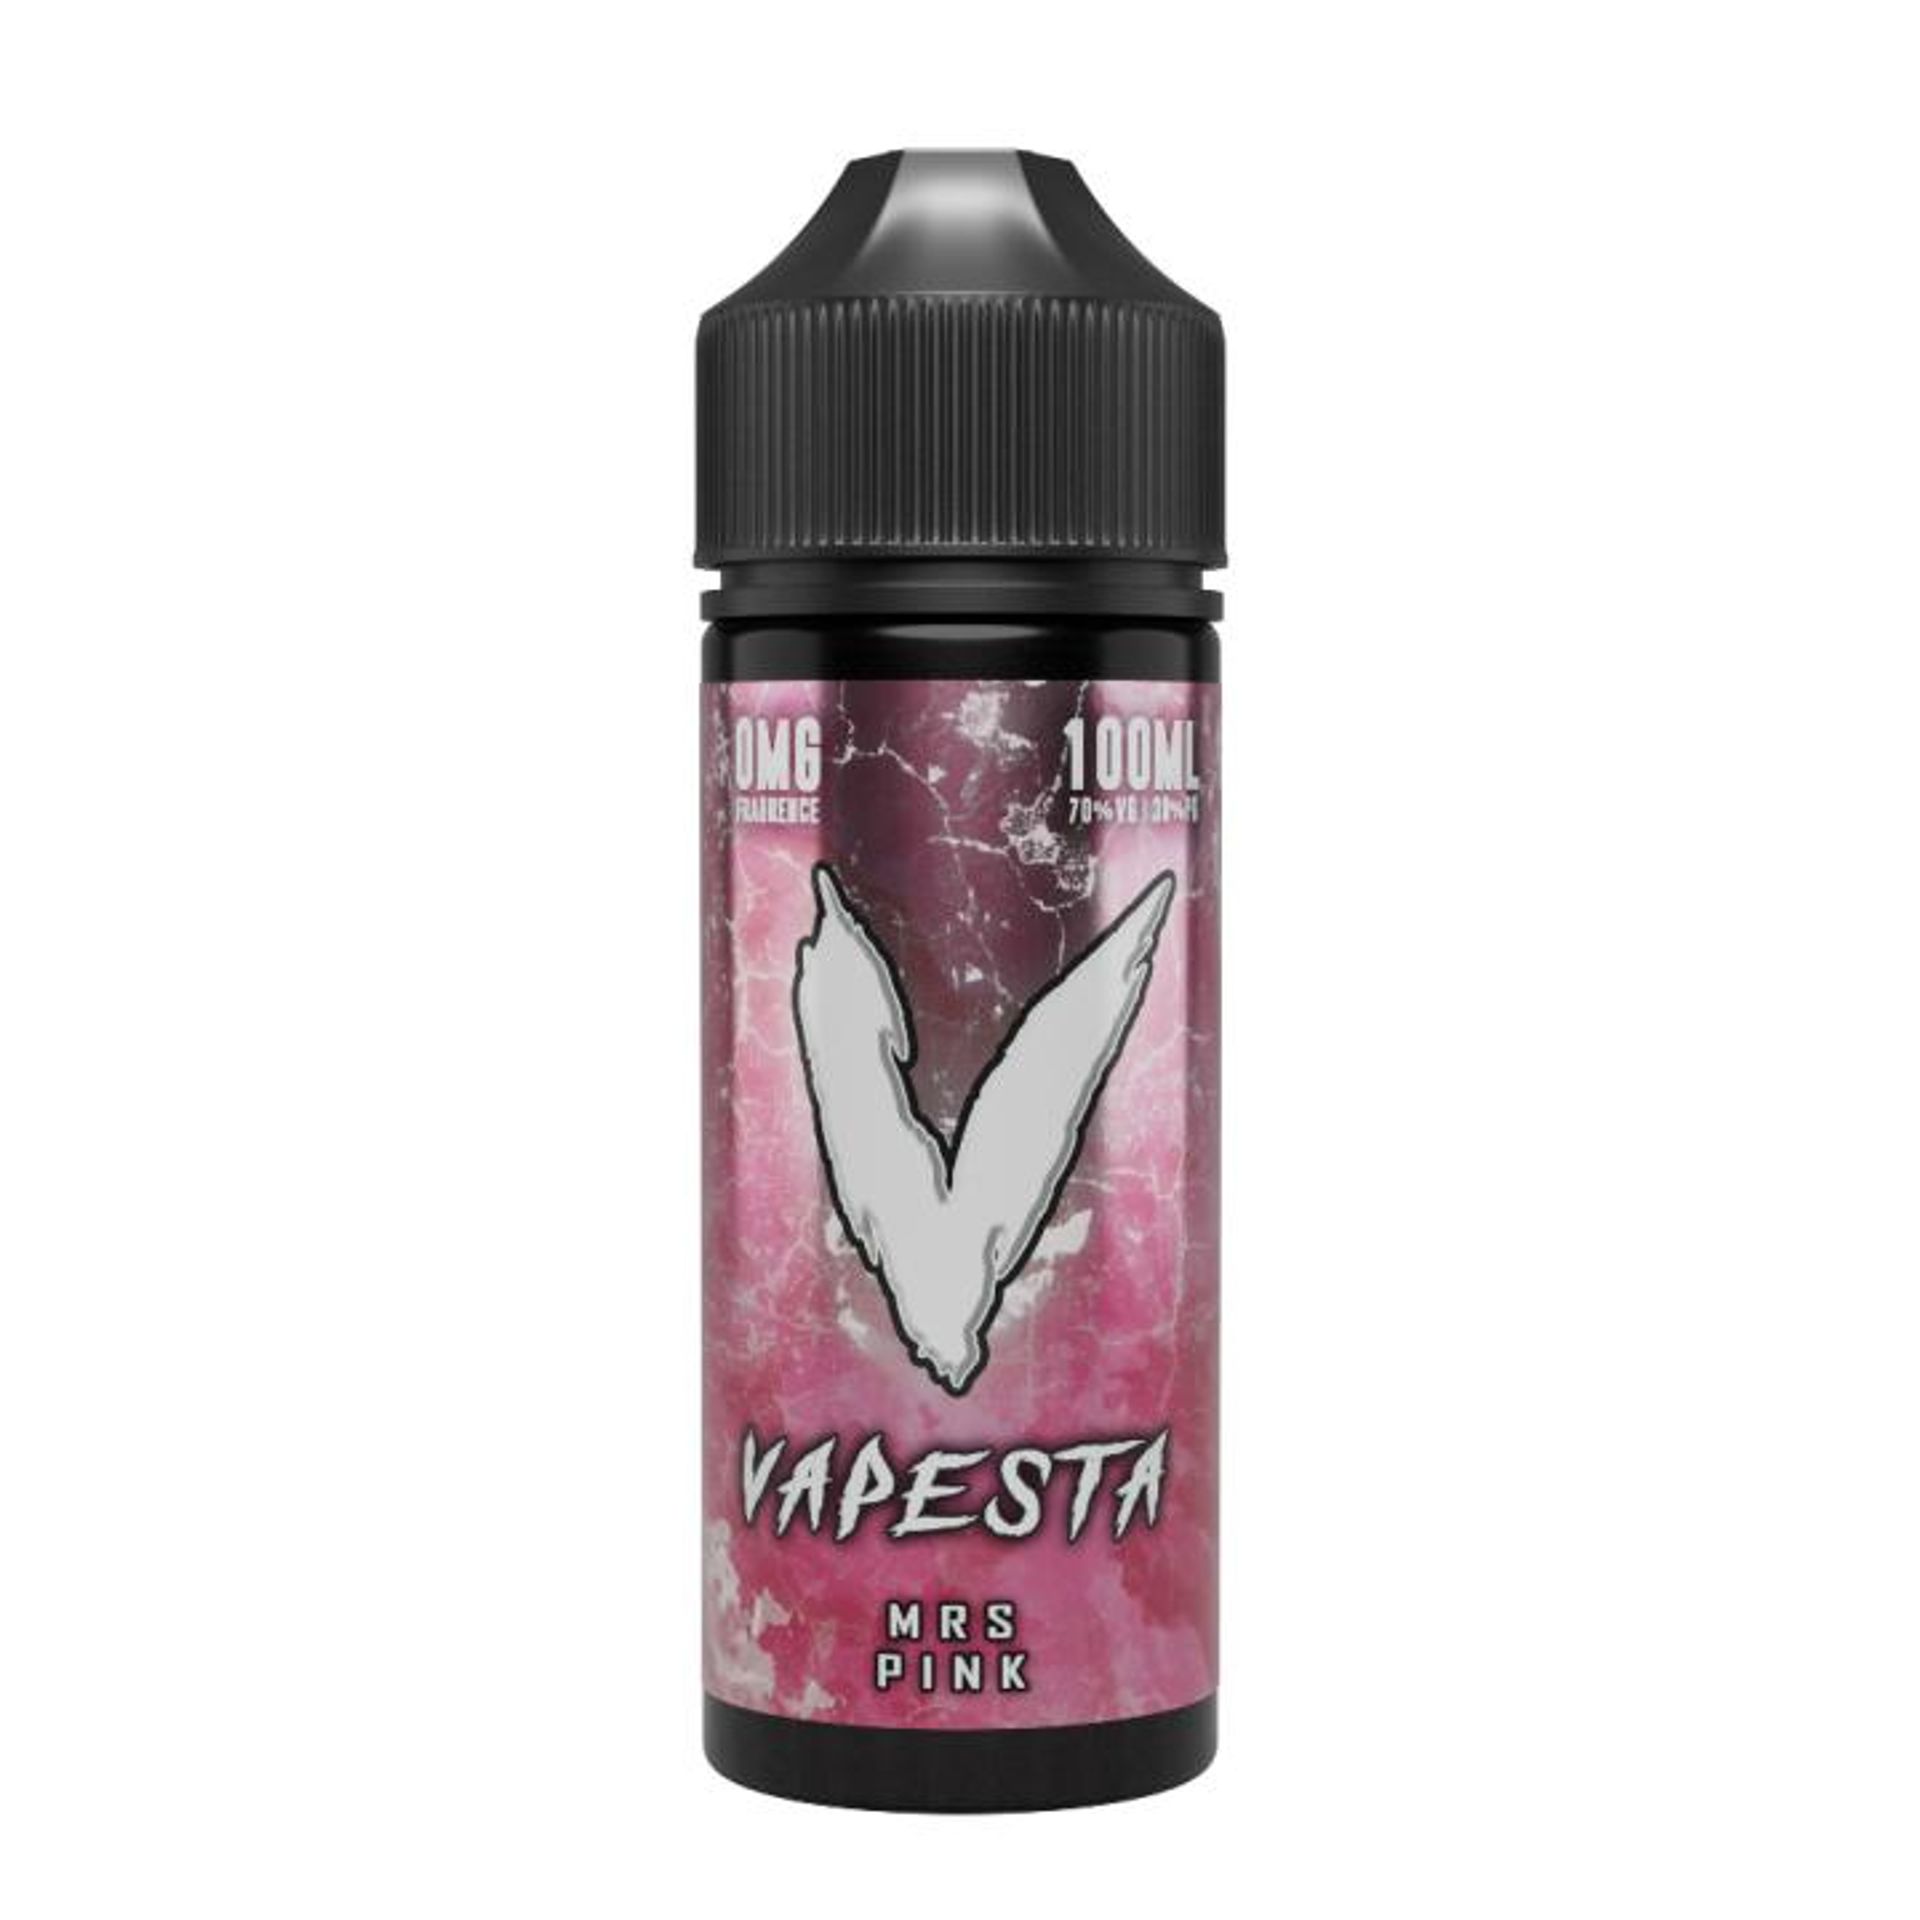 Image of Mrs Pink by Vapesta by Ultimate Puff